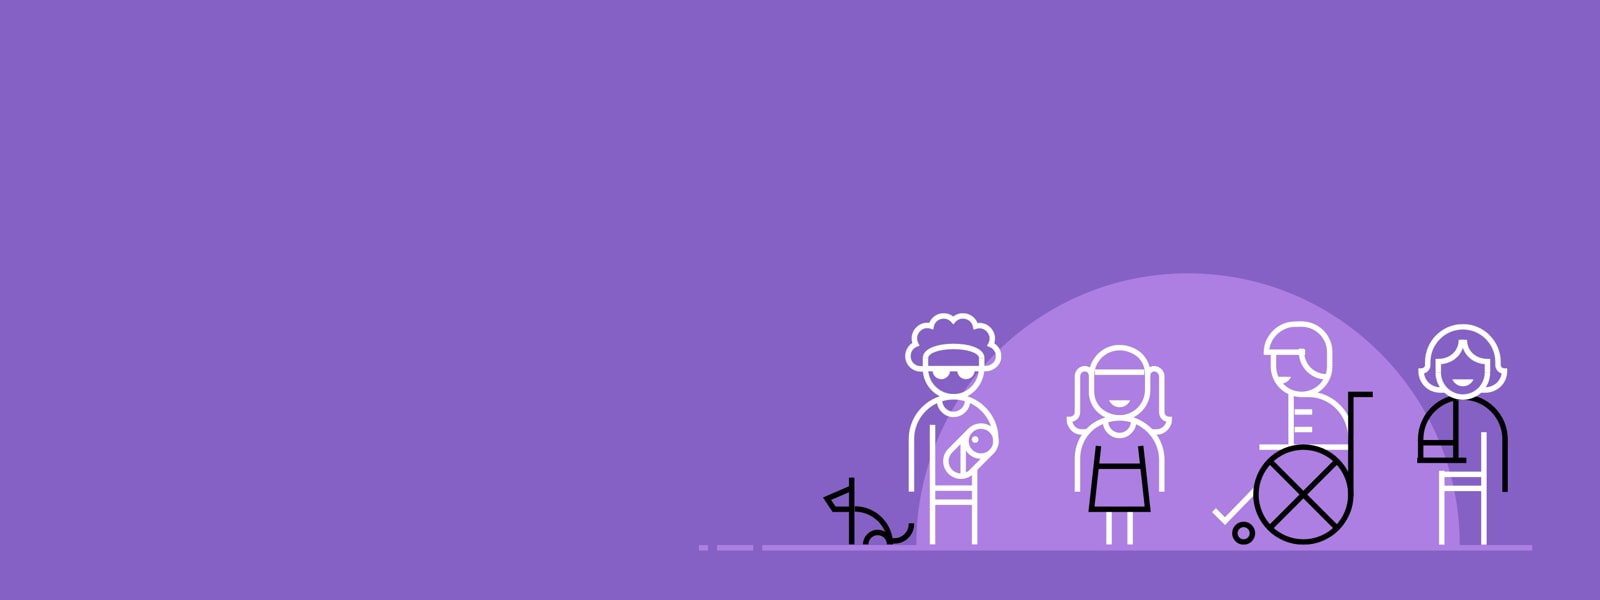 Inclusive design figures of 4 people and a dog. 1 person holding a baby, 1 using a wheelchair, 1 wearing a skirt, 1 using an arm sling